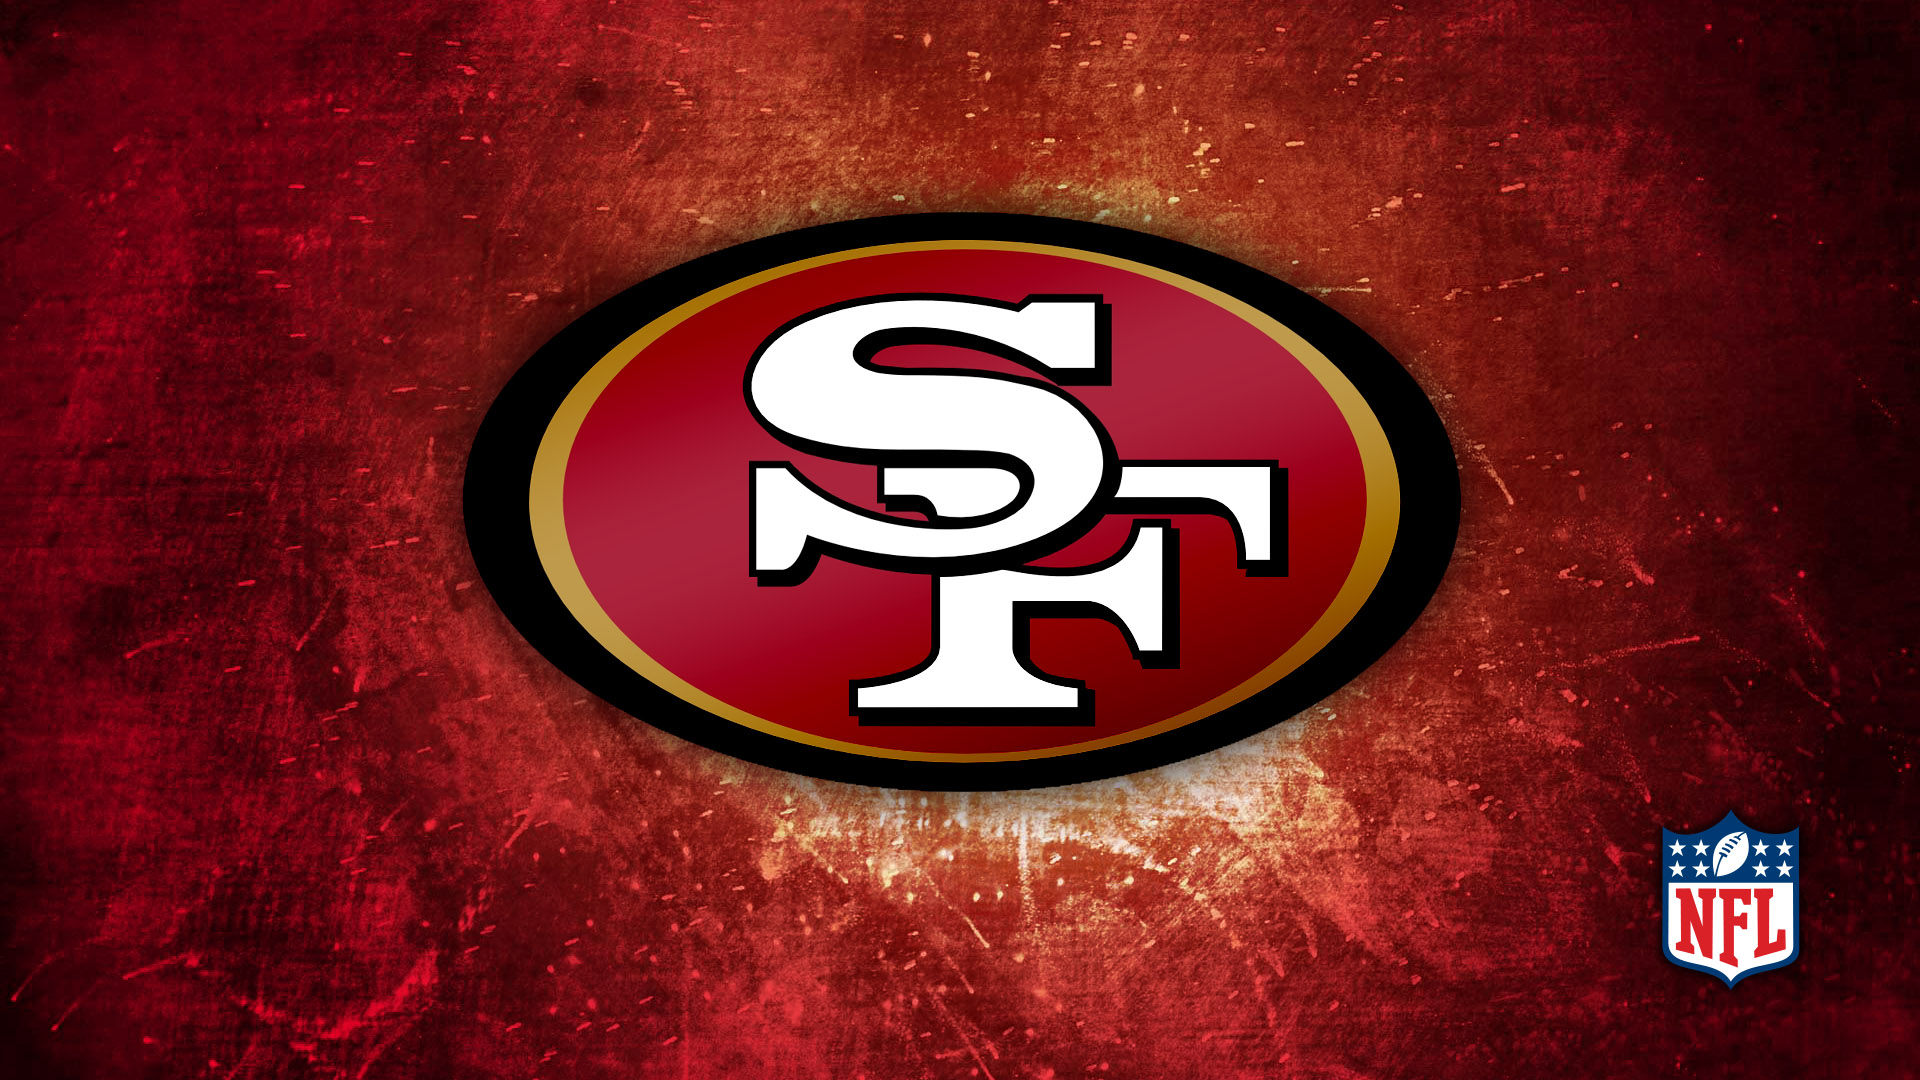 San Francisco 49ers HD background San Francisco 49ers wallpapers 1920x1080